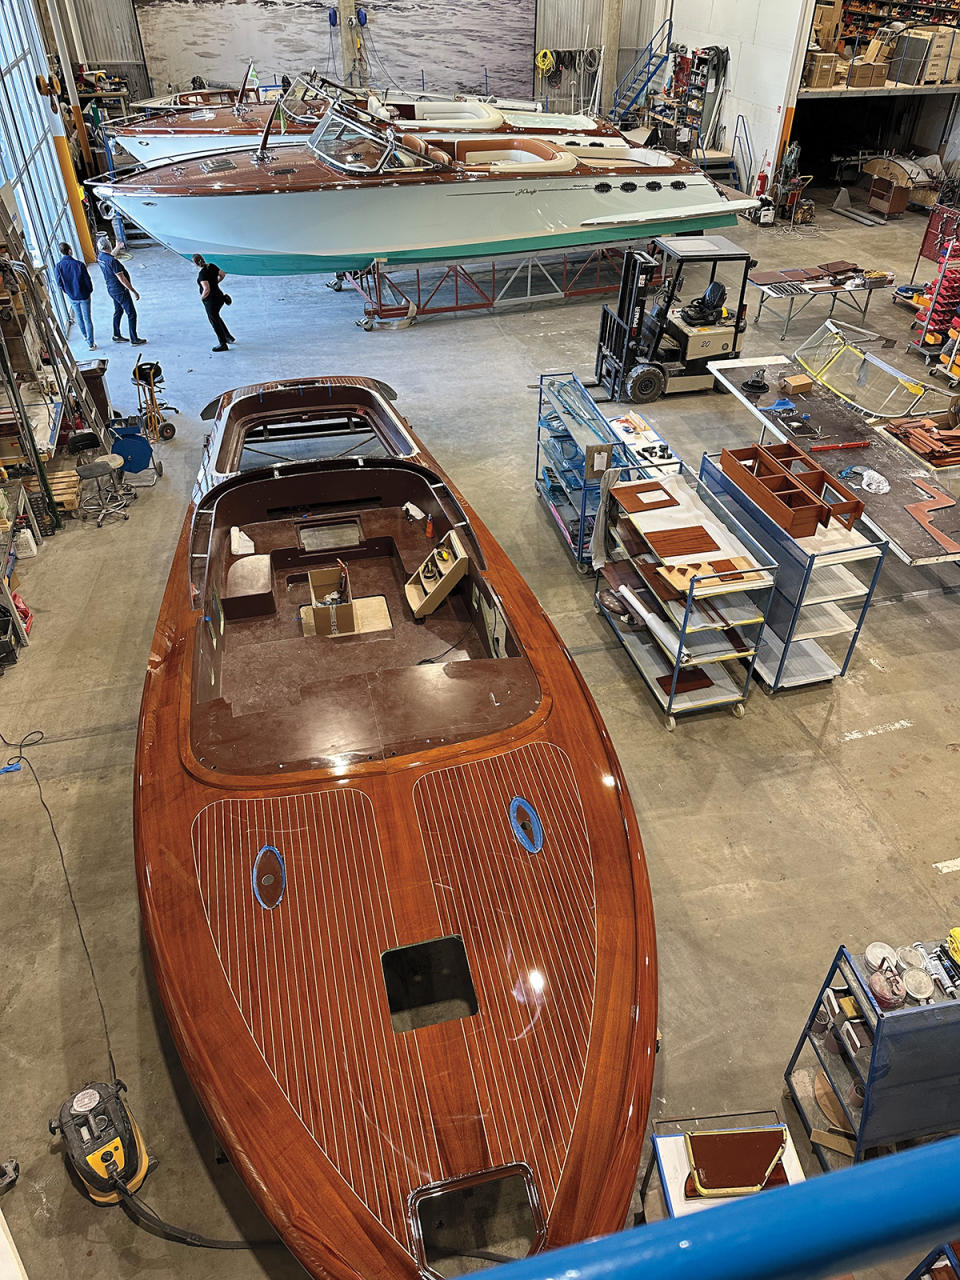 A J Craft hull provides the foundation for the Torpedo’s 1960s aesthetic